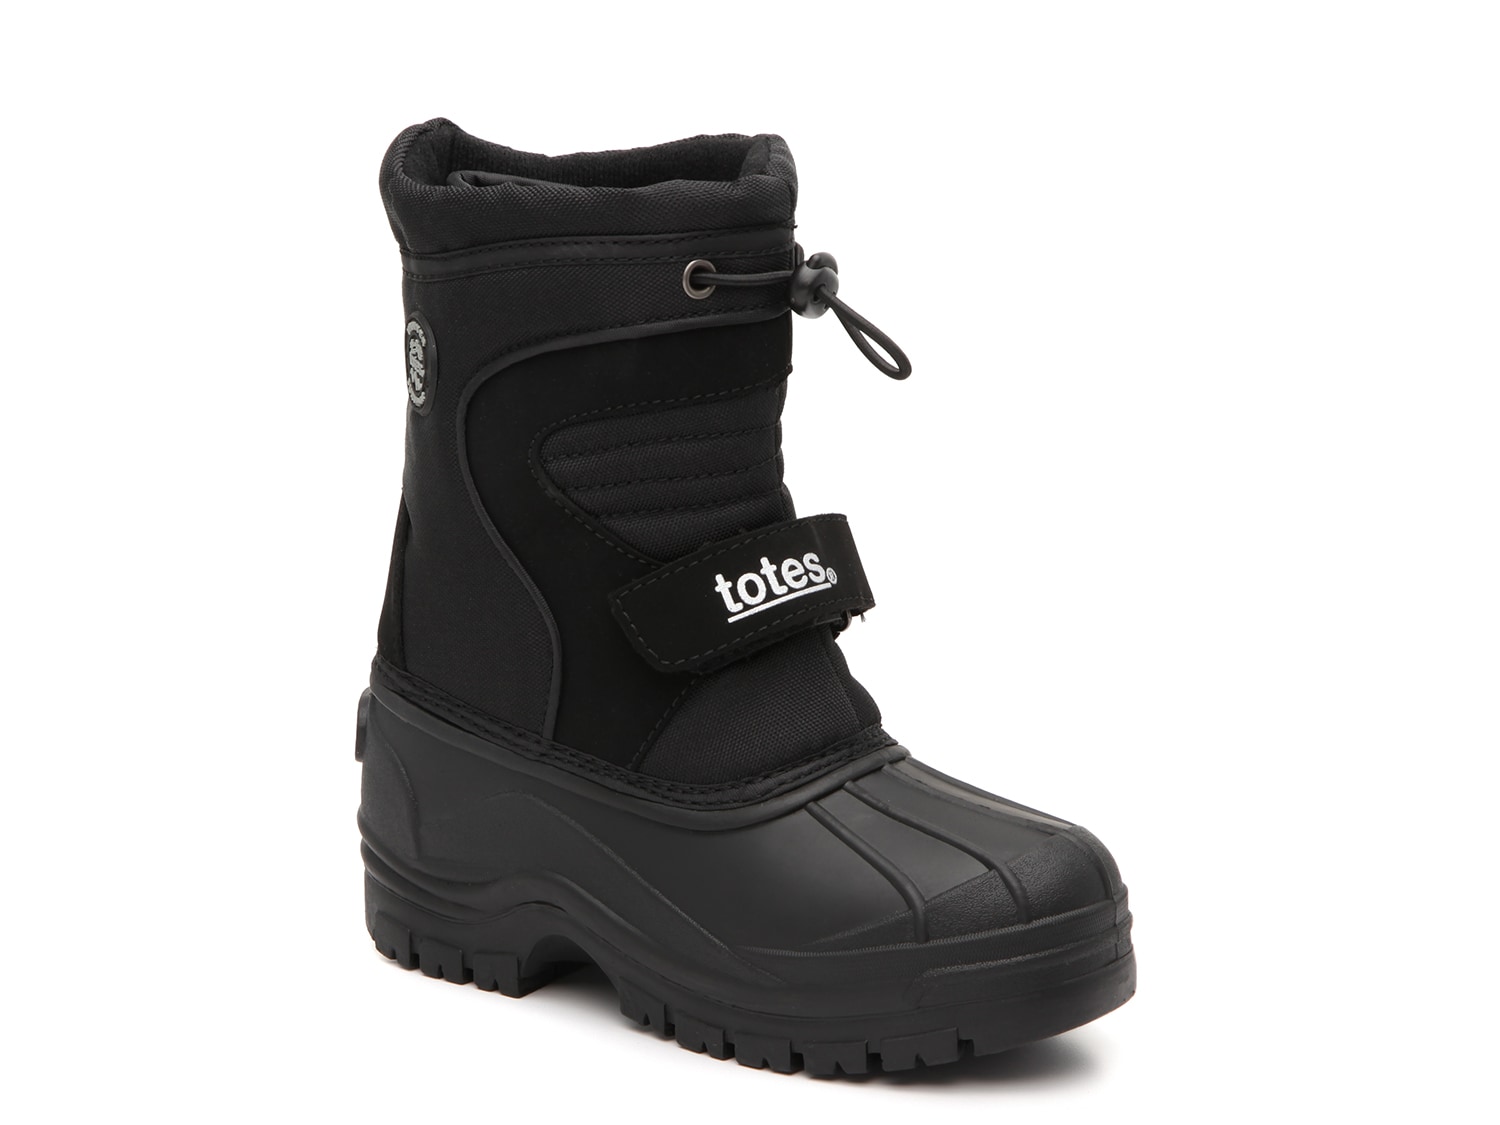 totes kids winter boots